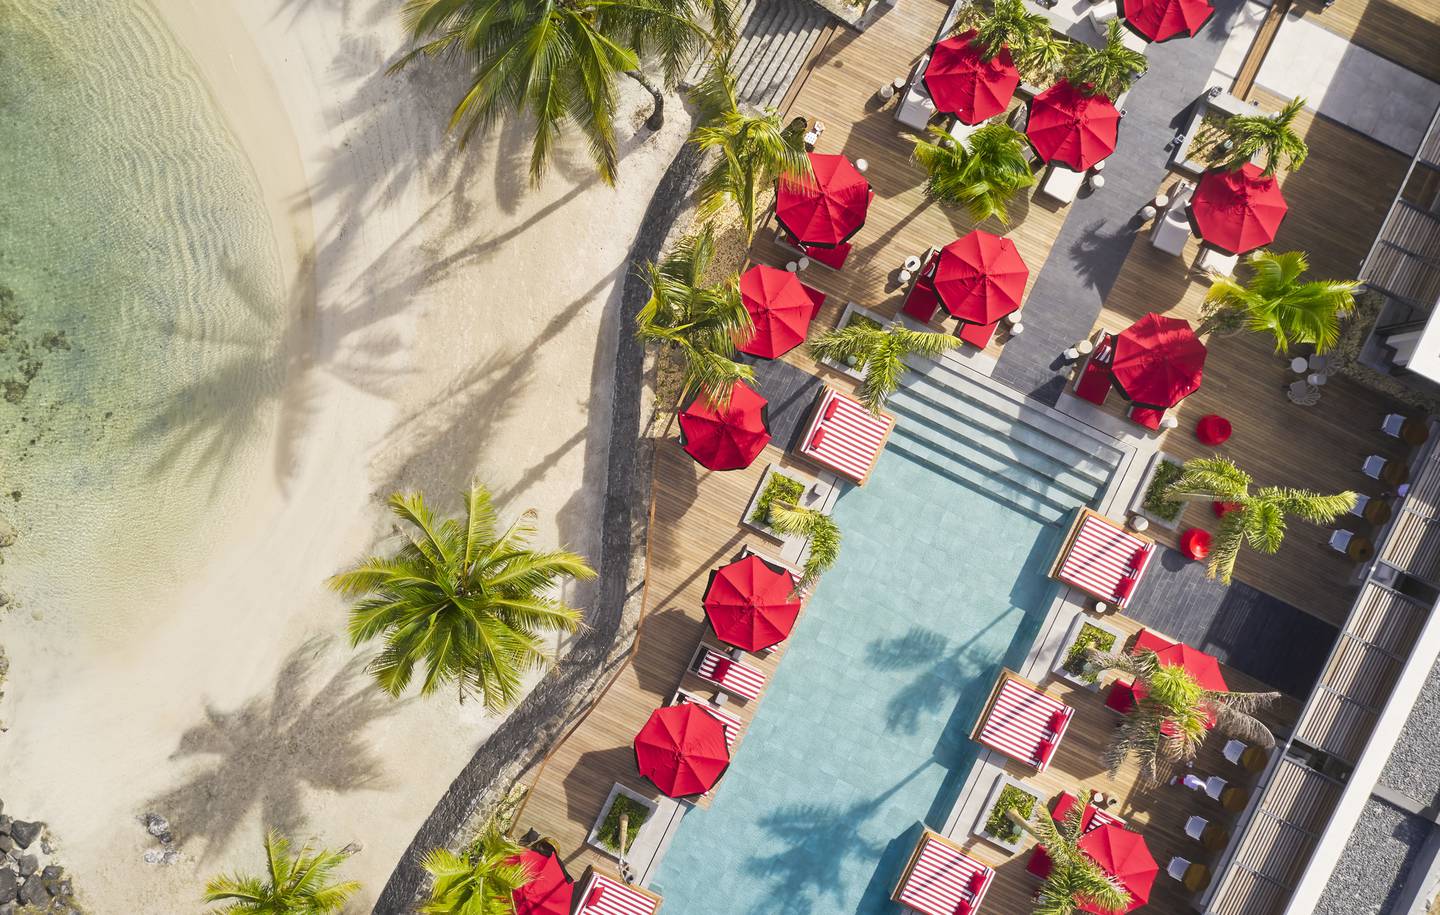 Hoppen works at the new Lux Grand Bae resort and condominium in Mauritius.Photo: Kelly Hoban